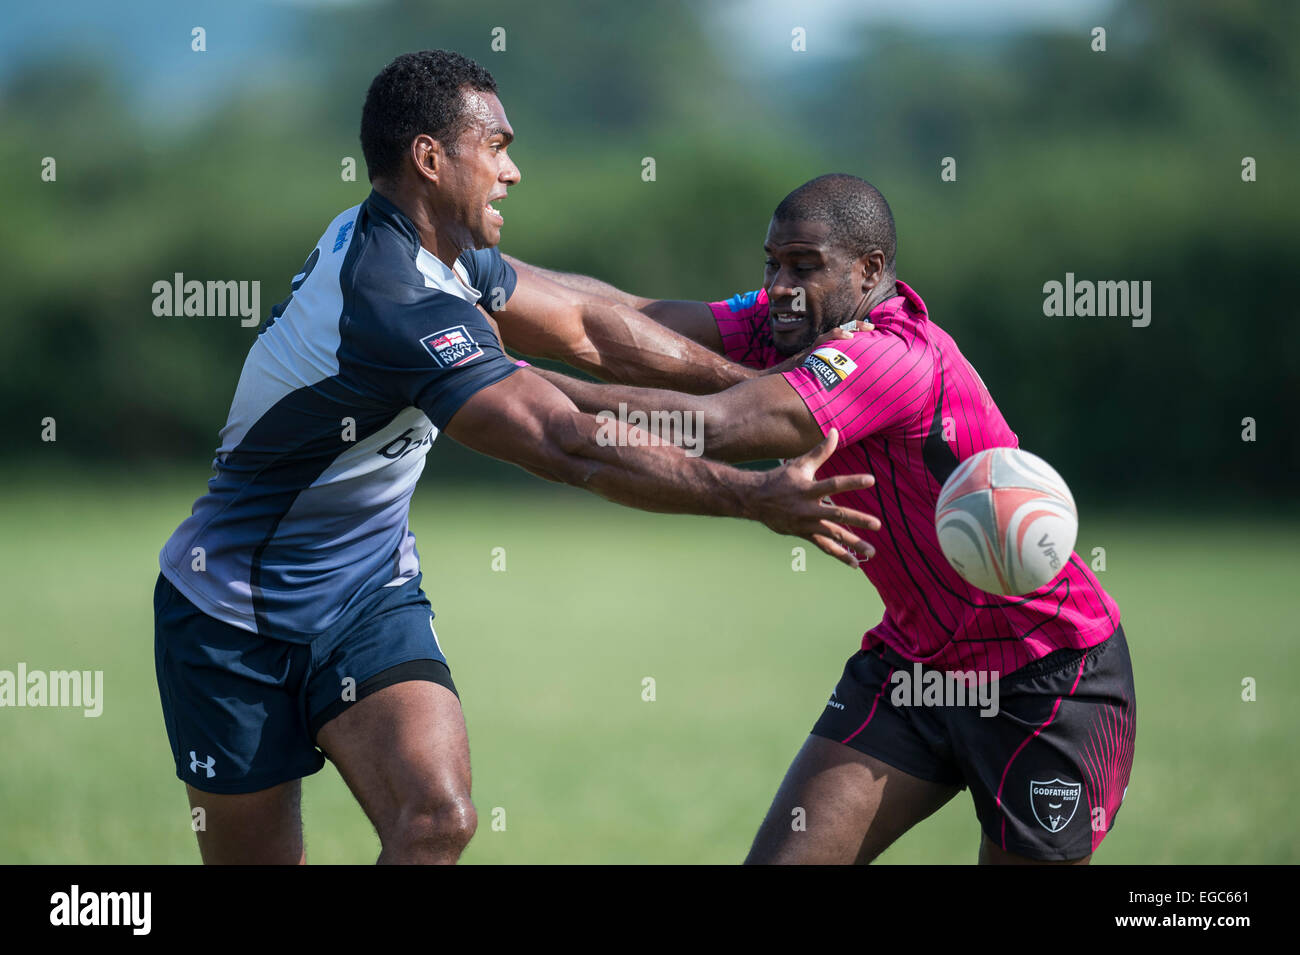 Rugby player passing ball. Stock Photo